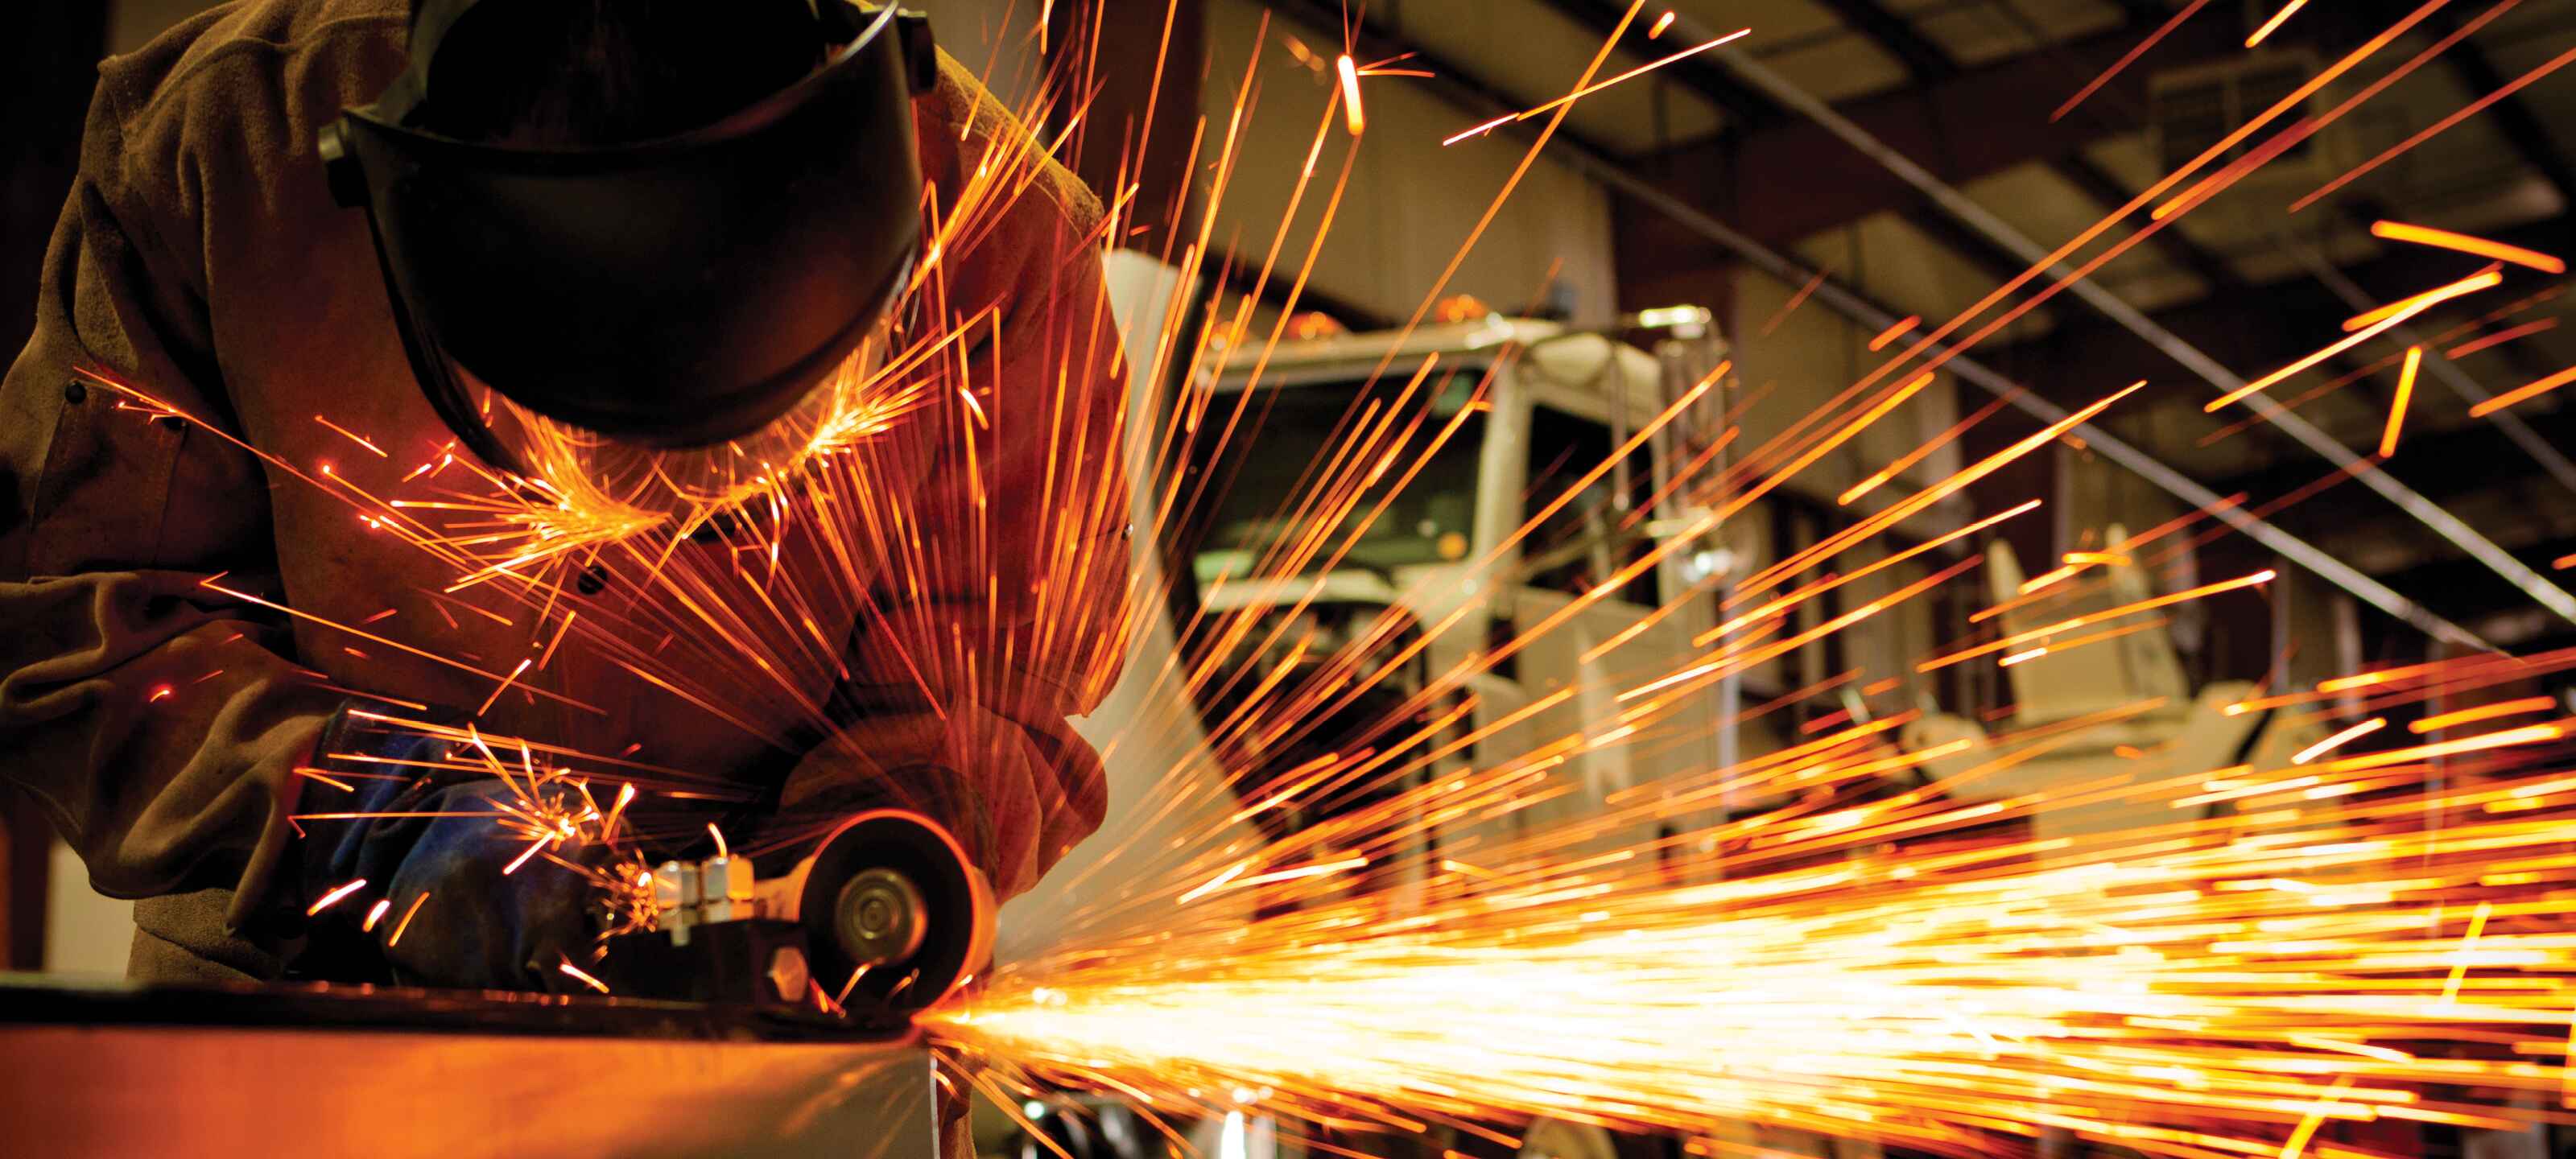 Technician welding part with sparks flying